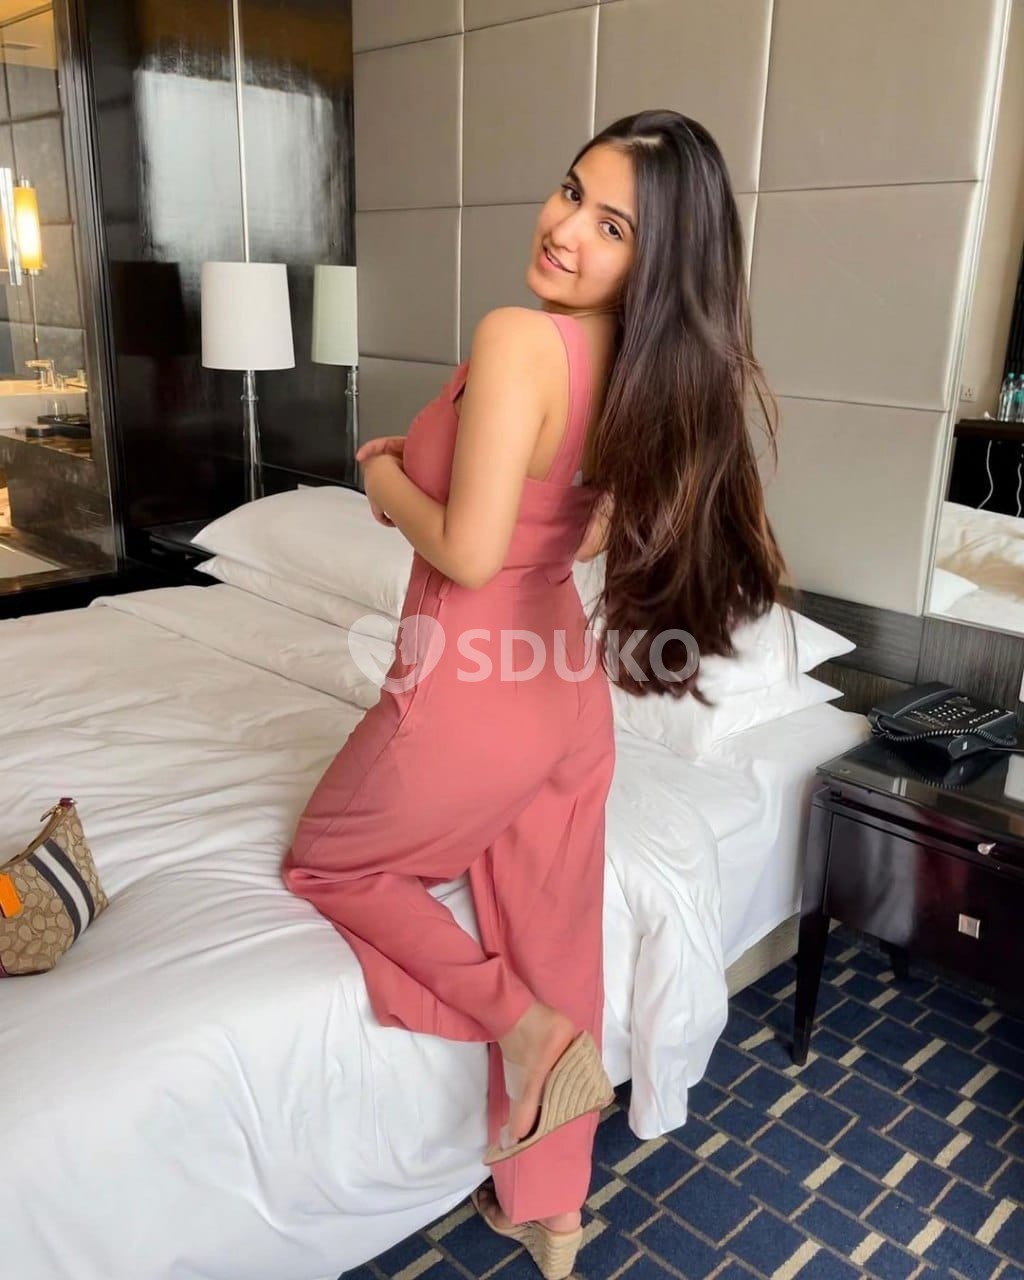 Faridabad ⭐⭐⭐100% trusted genuine low budget VIP independent genuine service book now